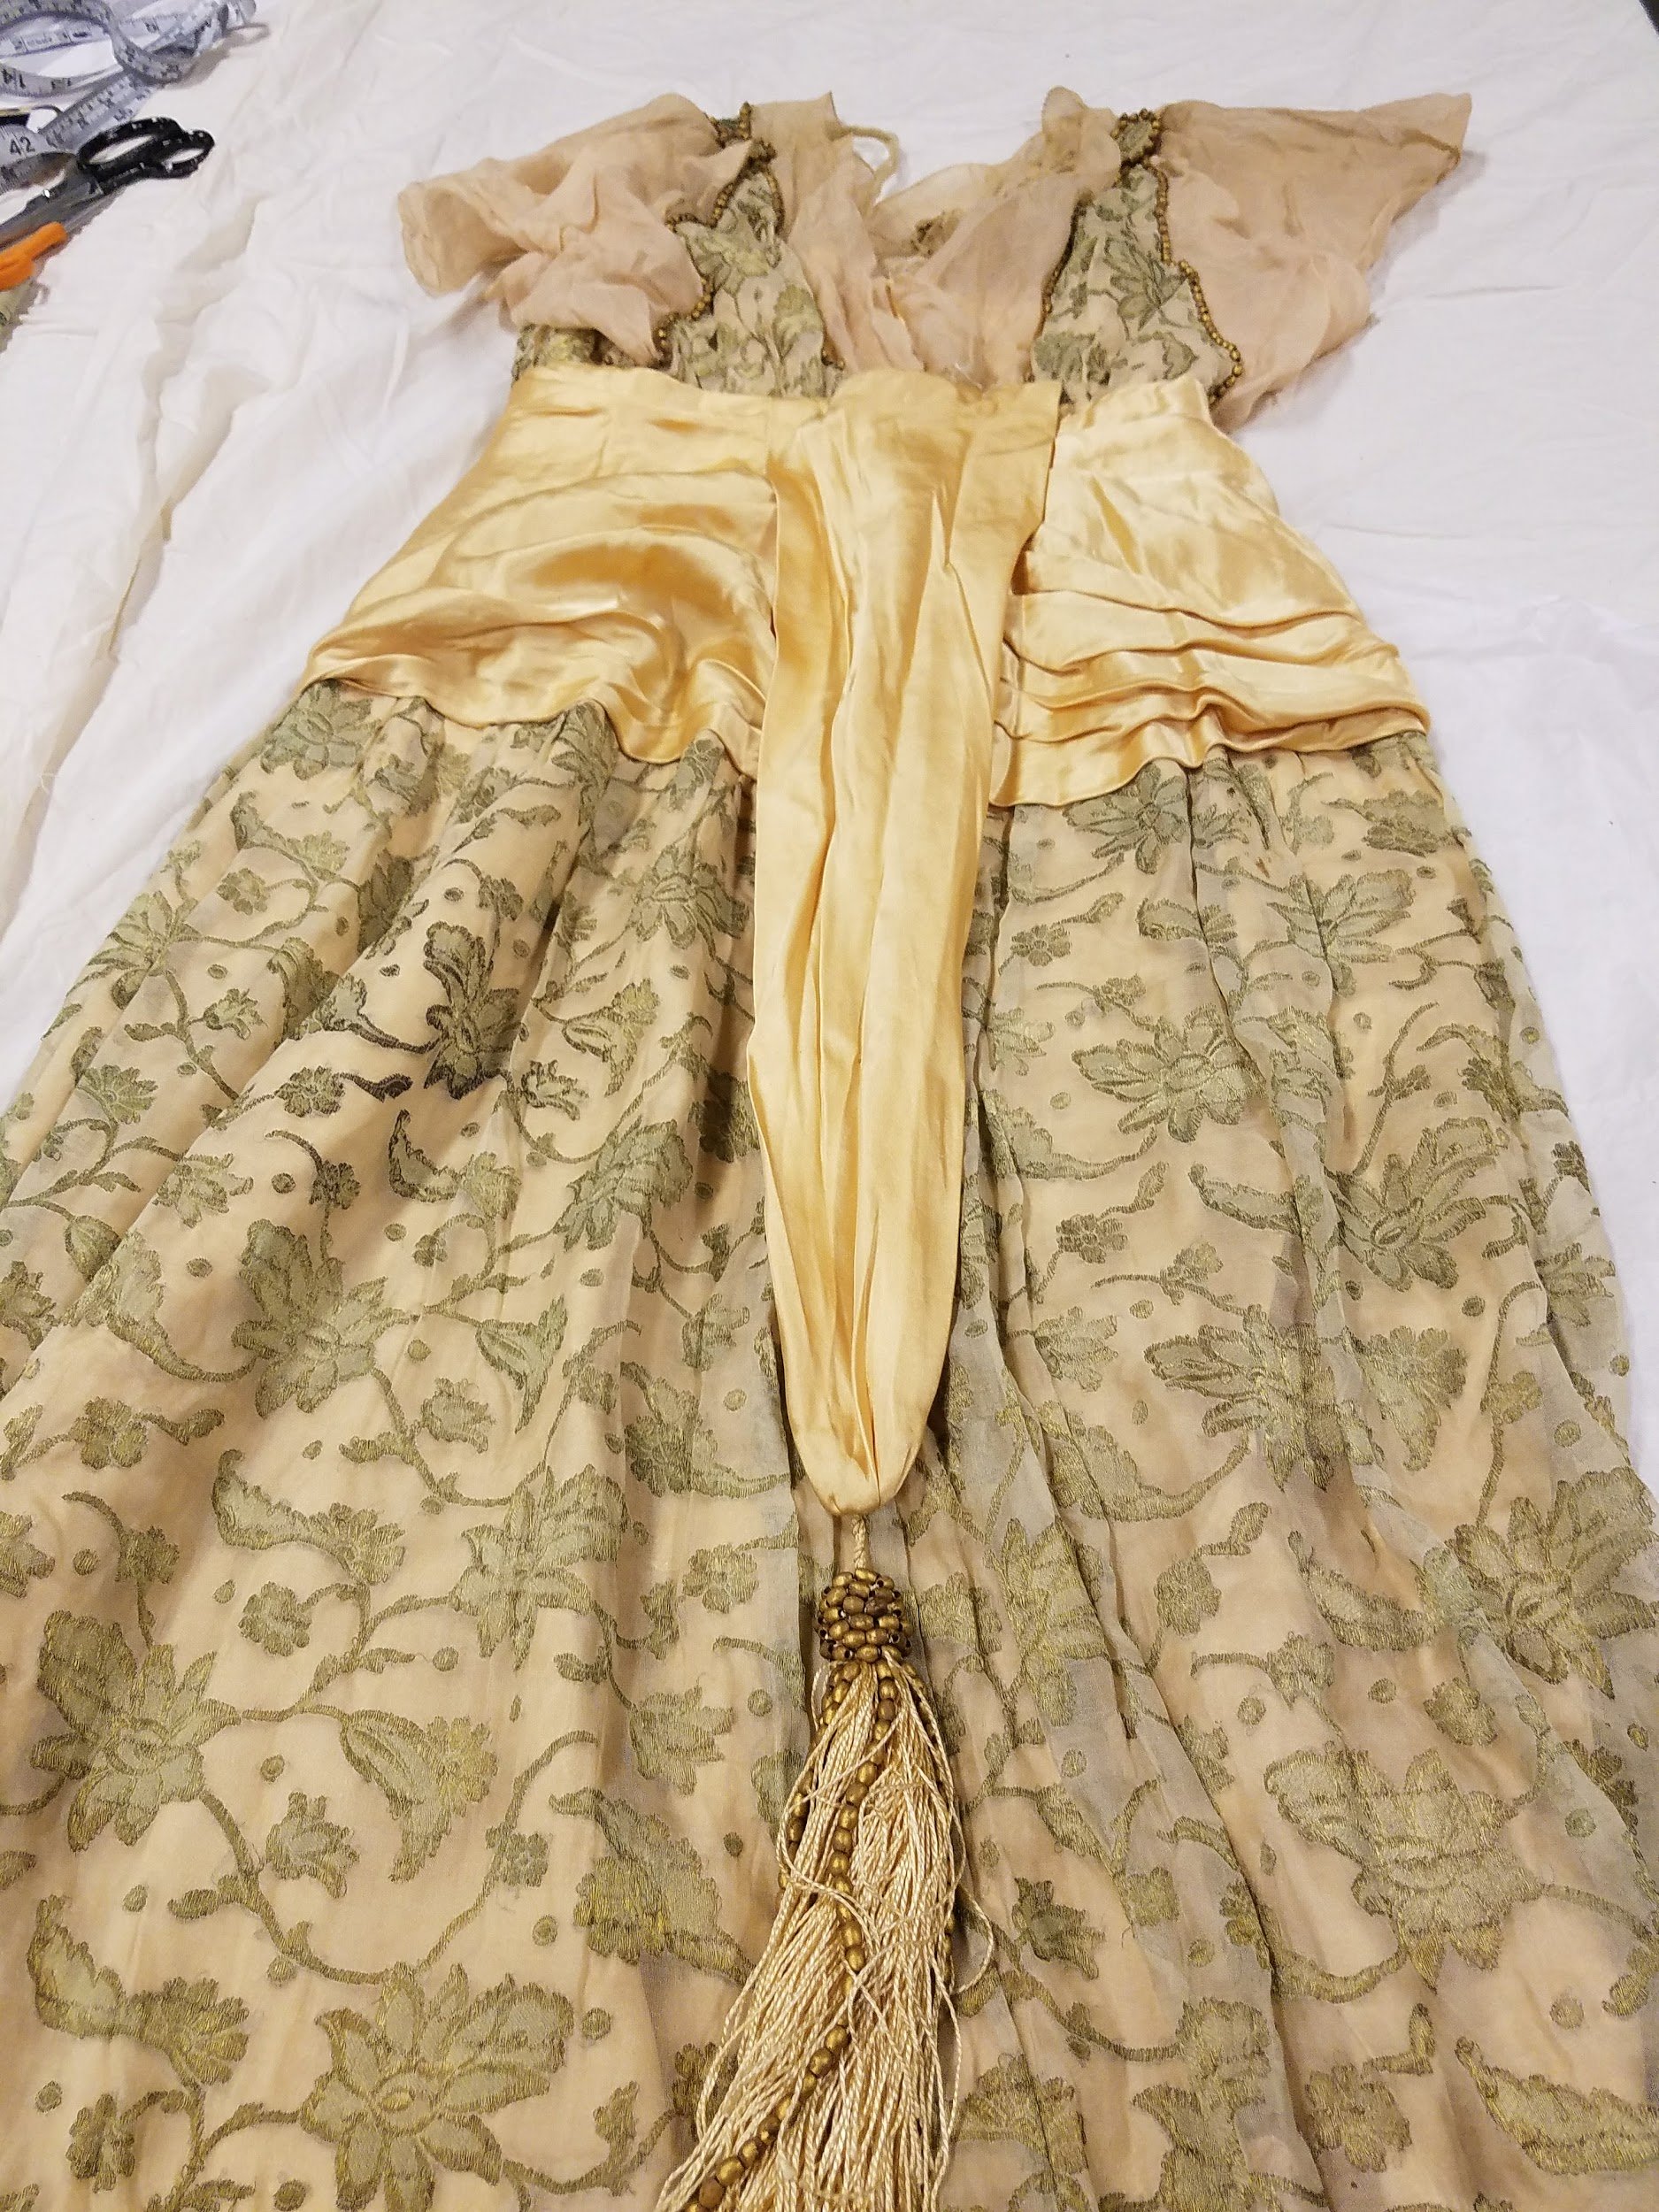 La Belle Epoque and Liberty & Co.’s Opulent Fashions – Maryland Center ...